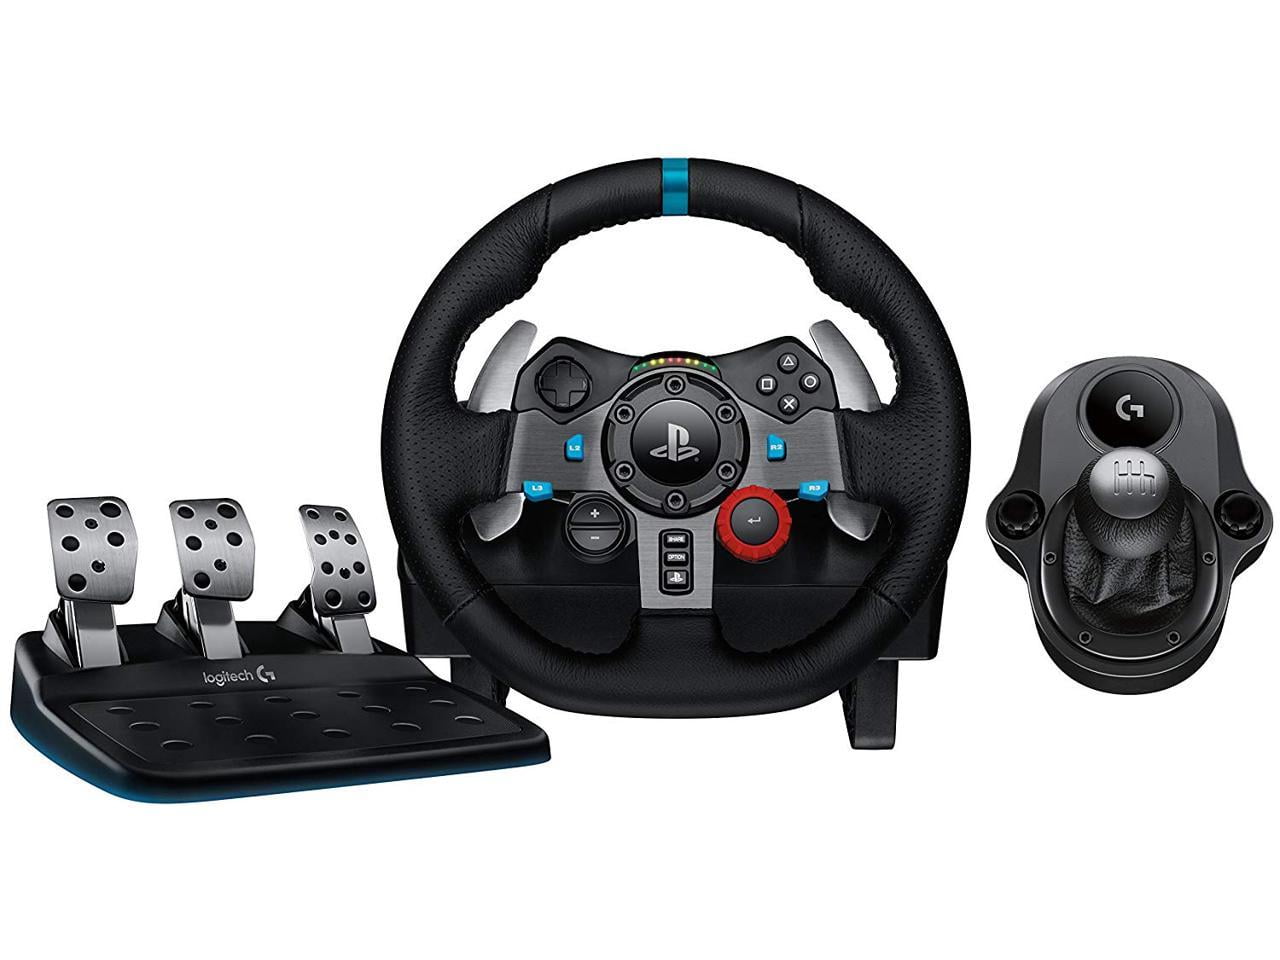 Logitech G920 & G29 Driving Force Review > G29 Driving Force